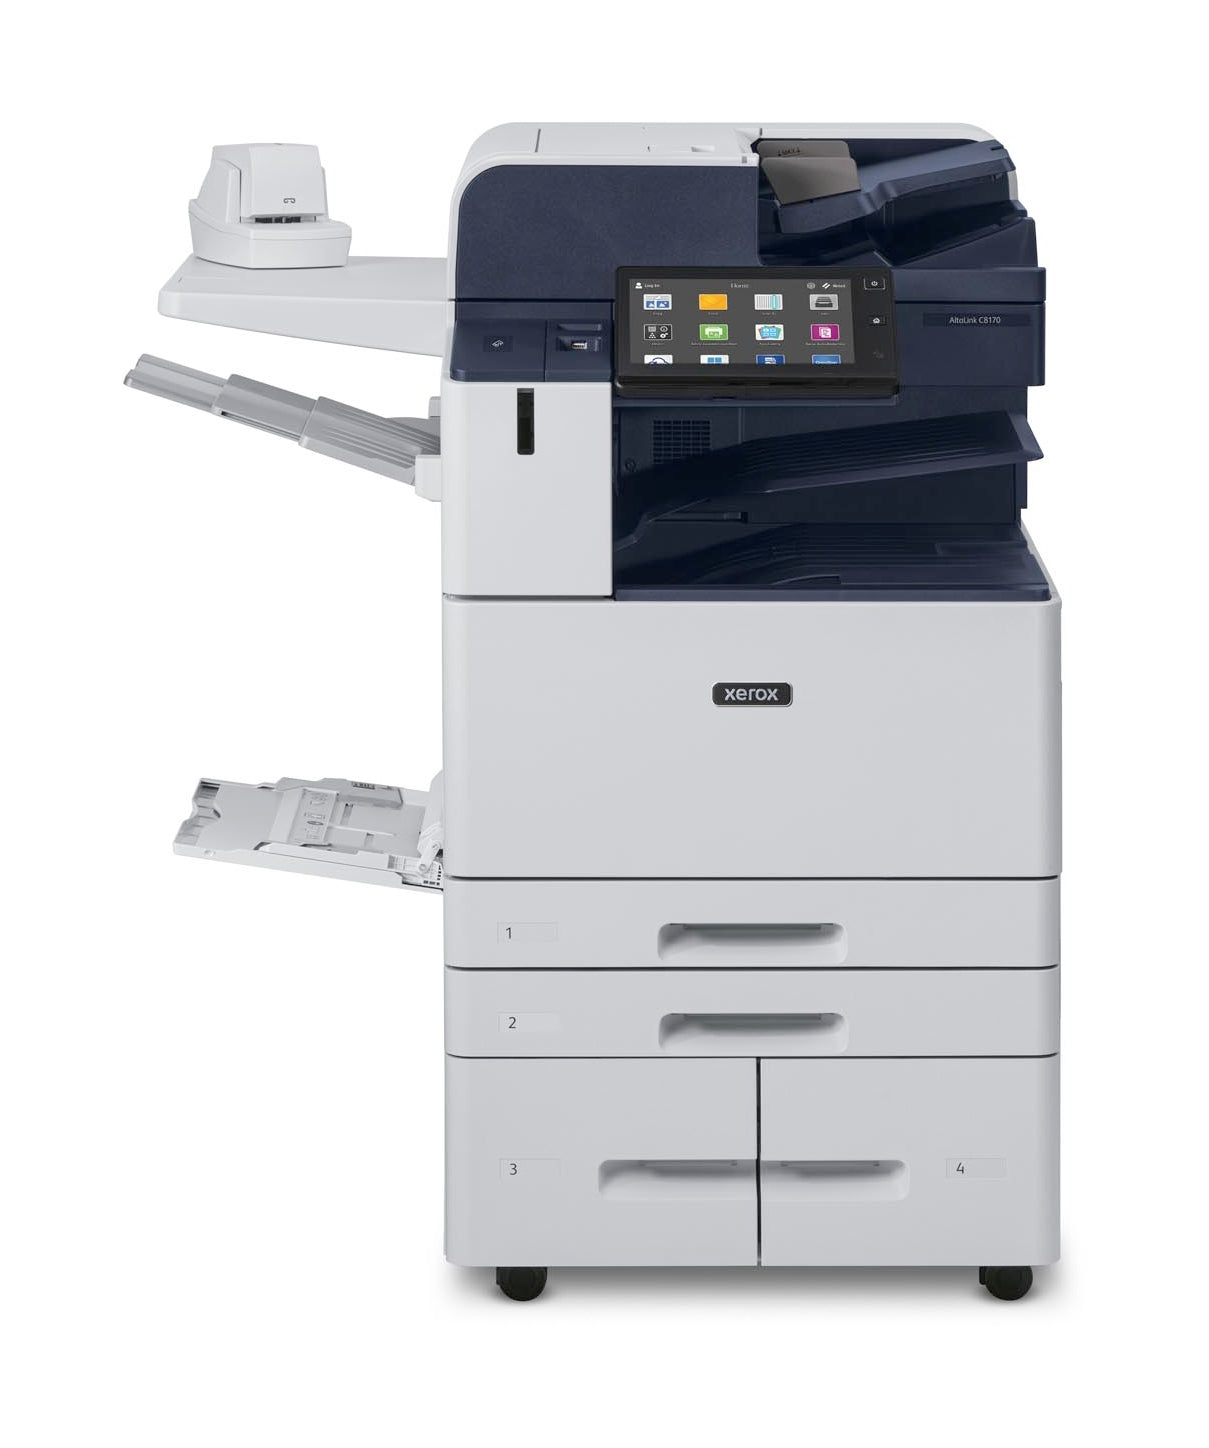 Xerox VersaLink Office Printers vs. Xerox AltaLink Printers: Which is Right for You?